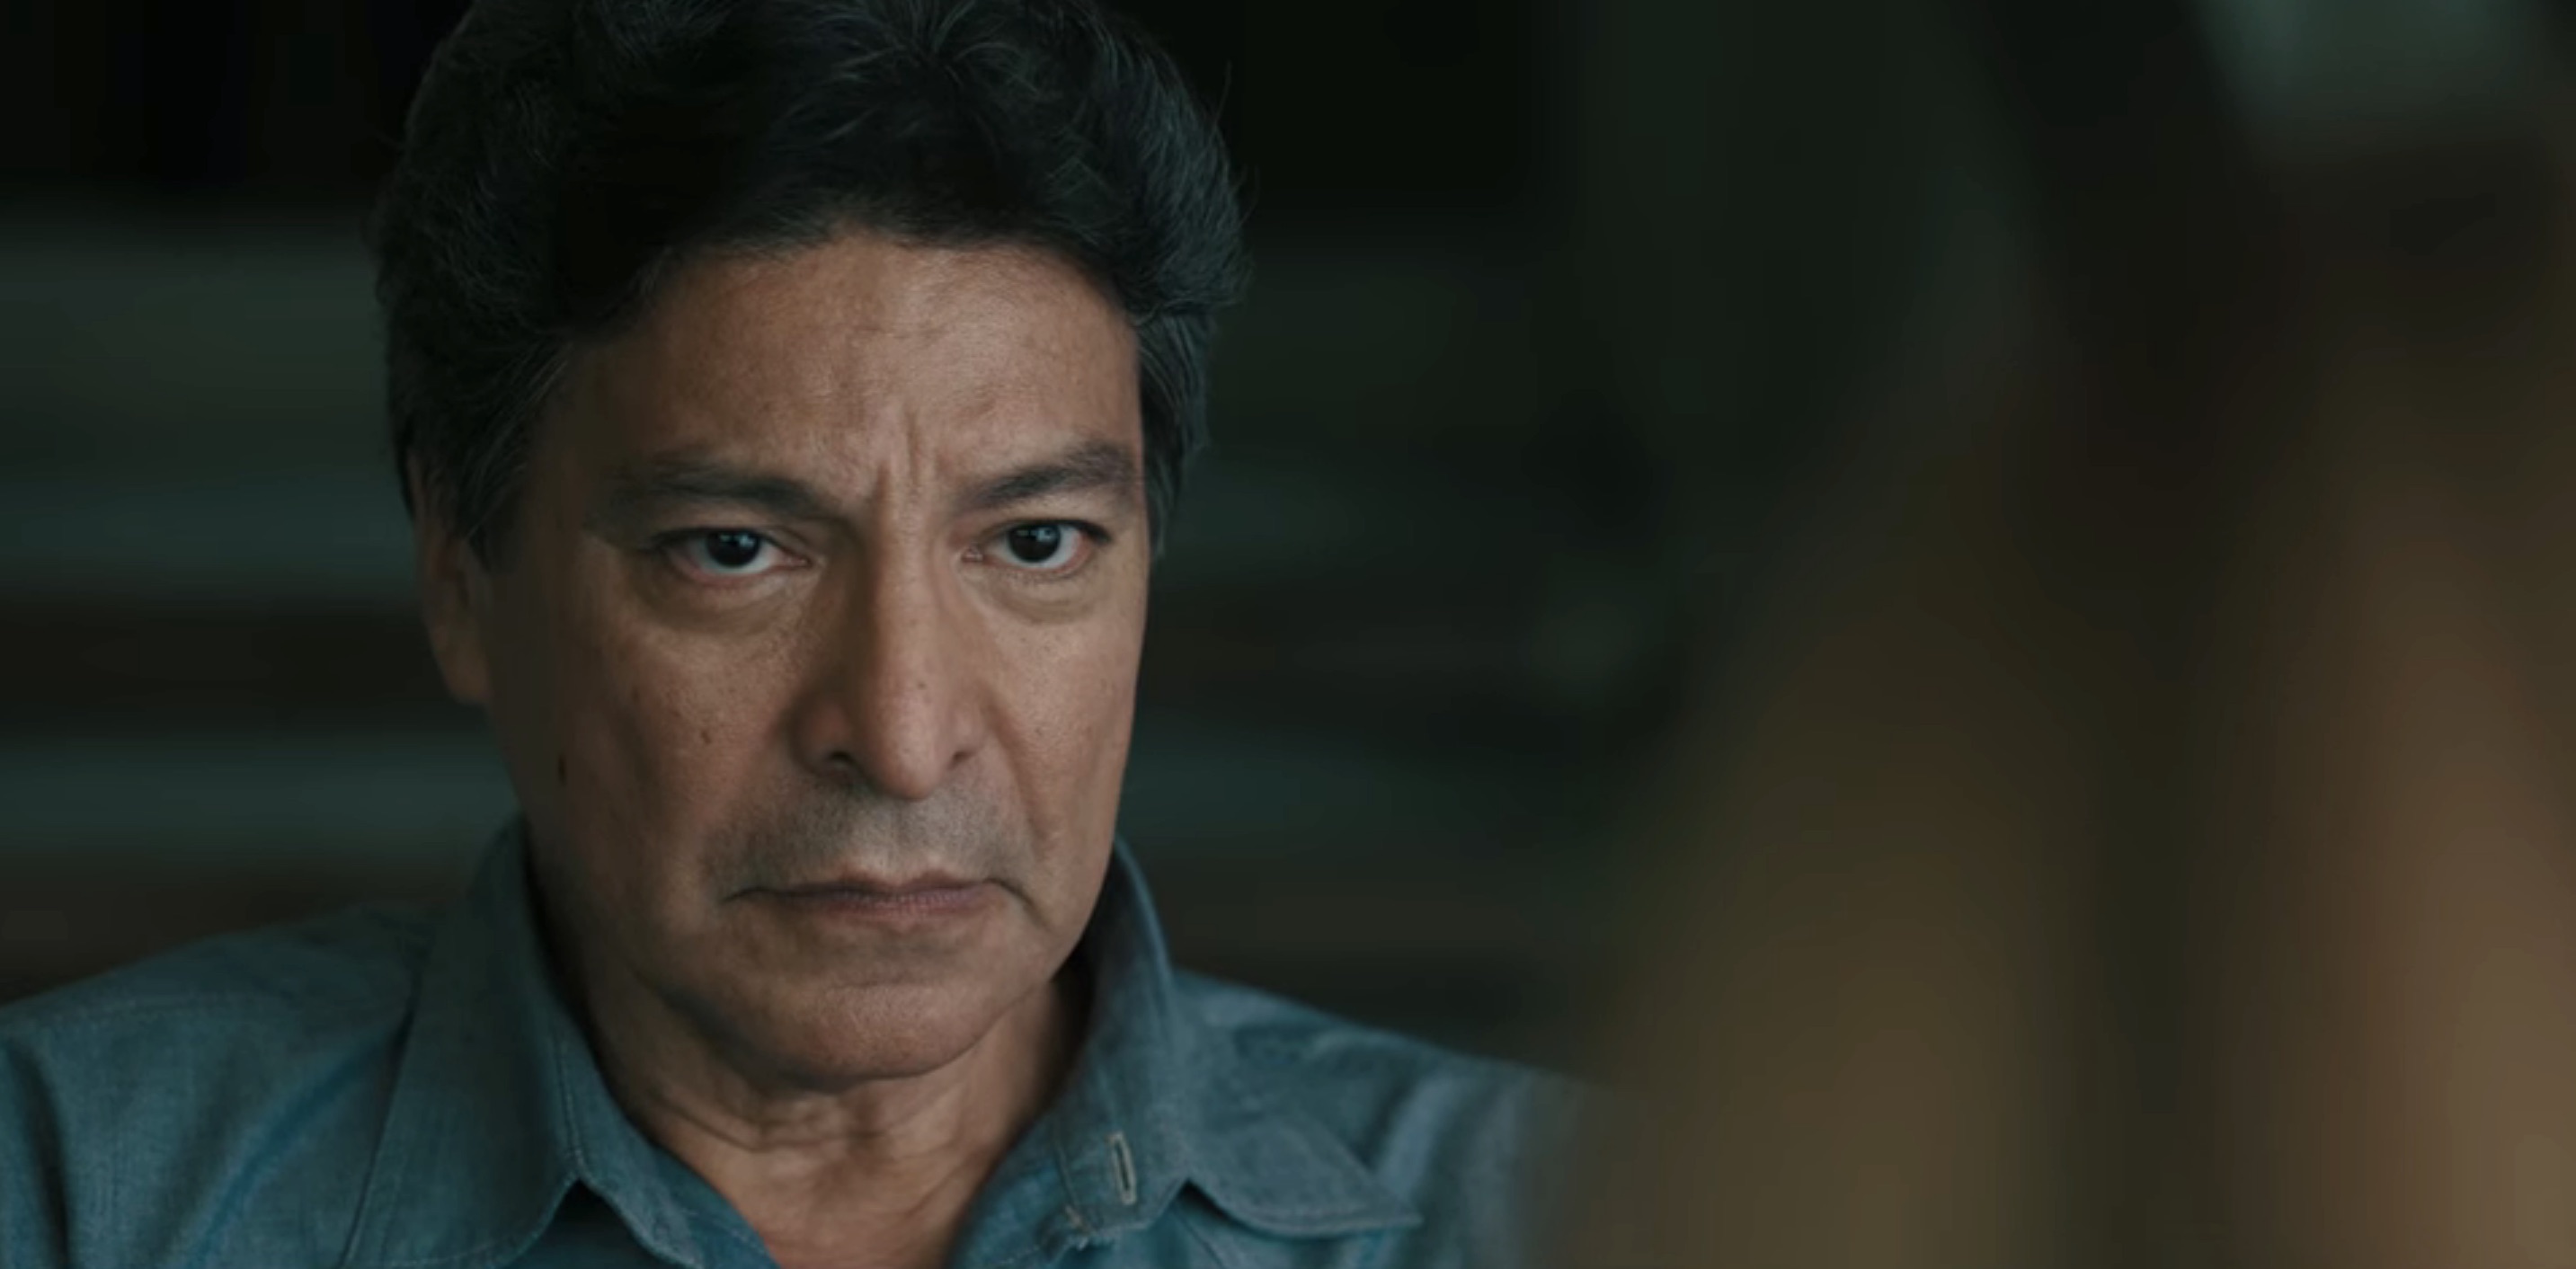 Pieces of Her Cast on Netflix - Gil Birmingham as Charlie Bass